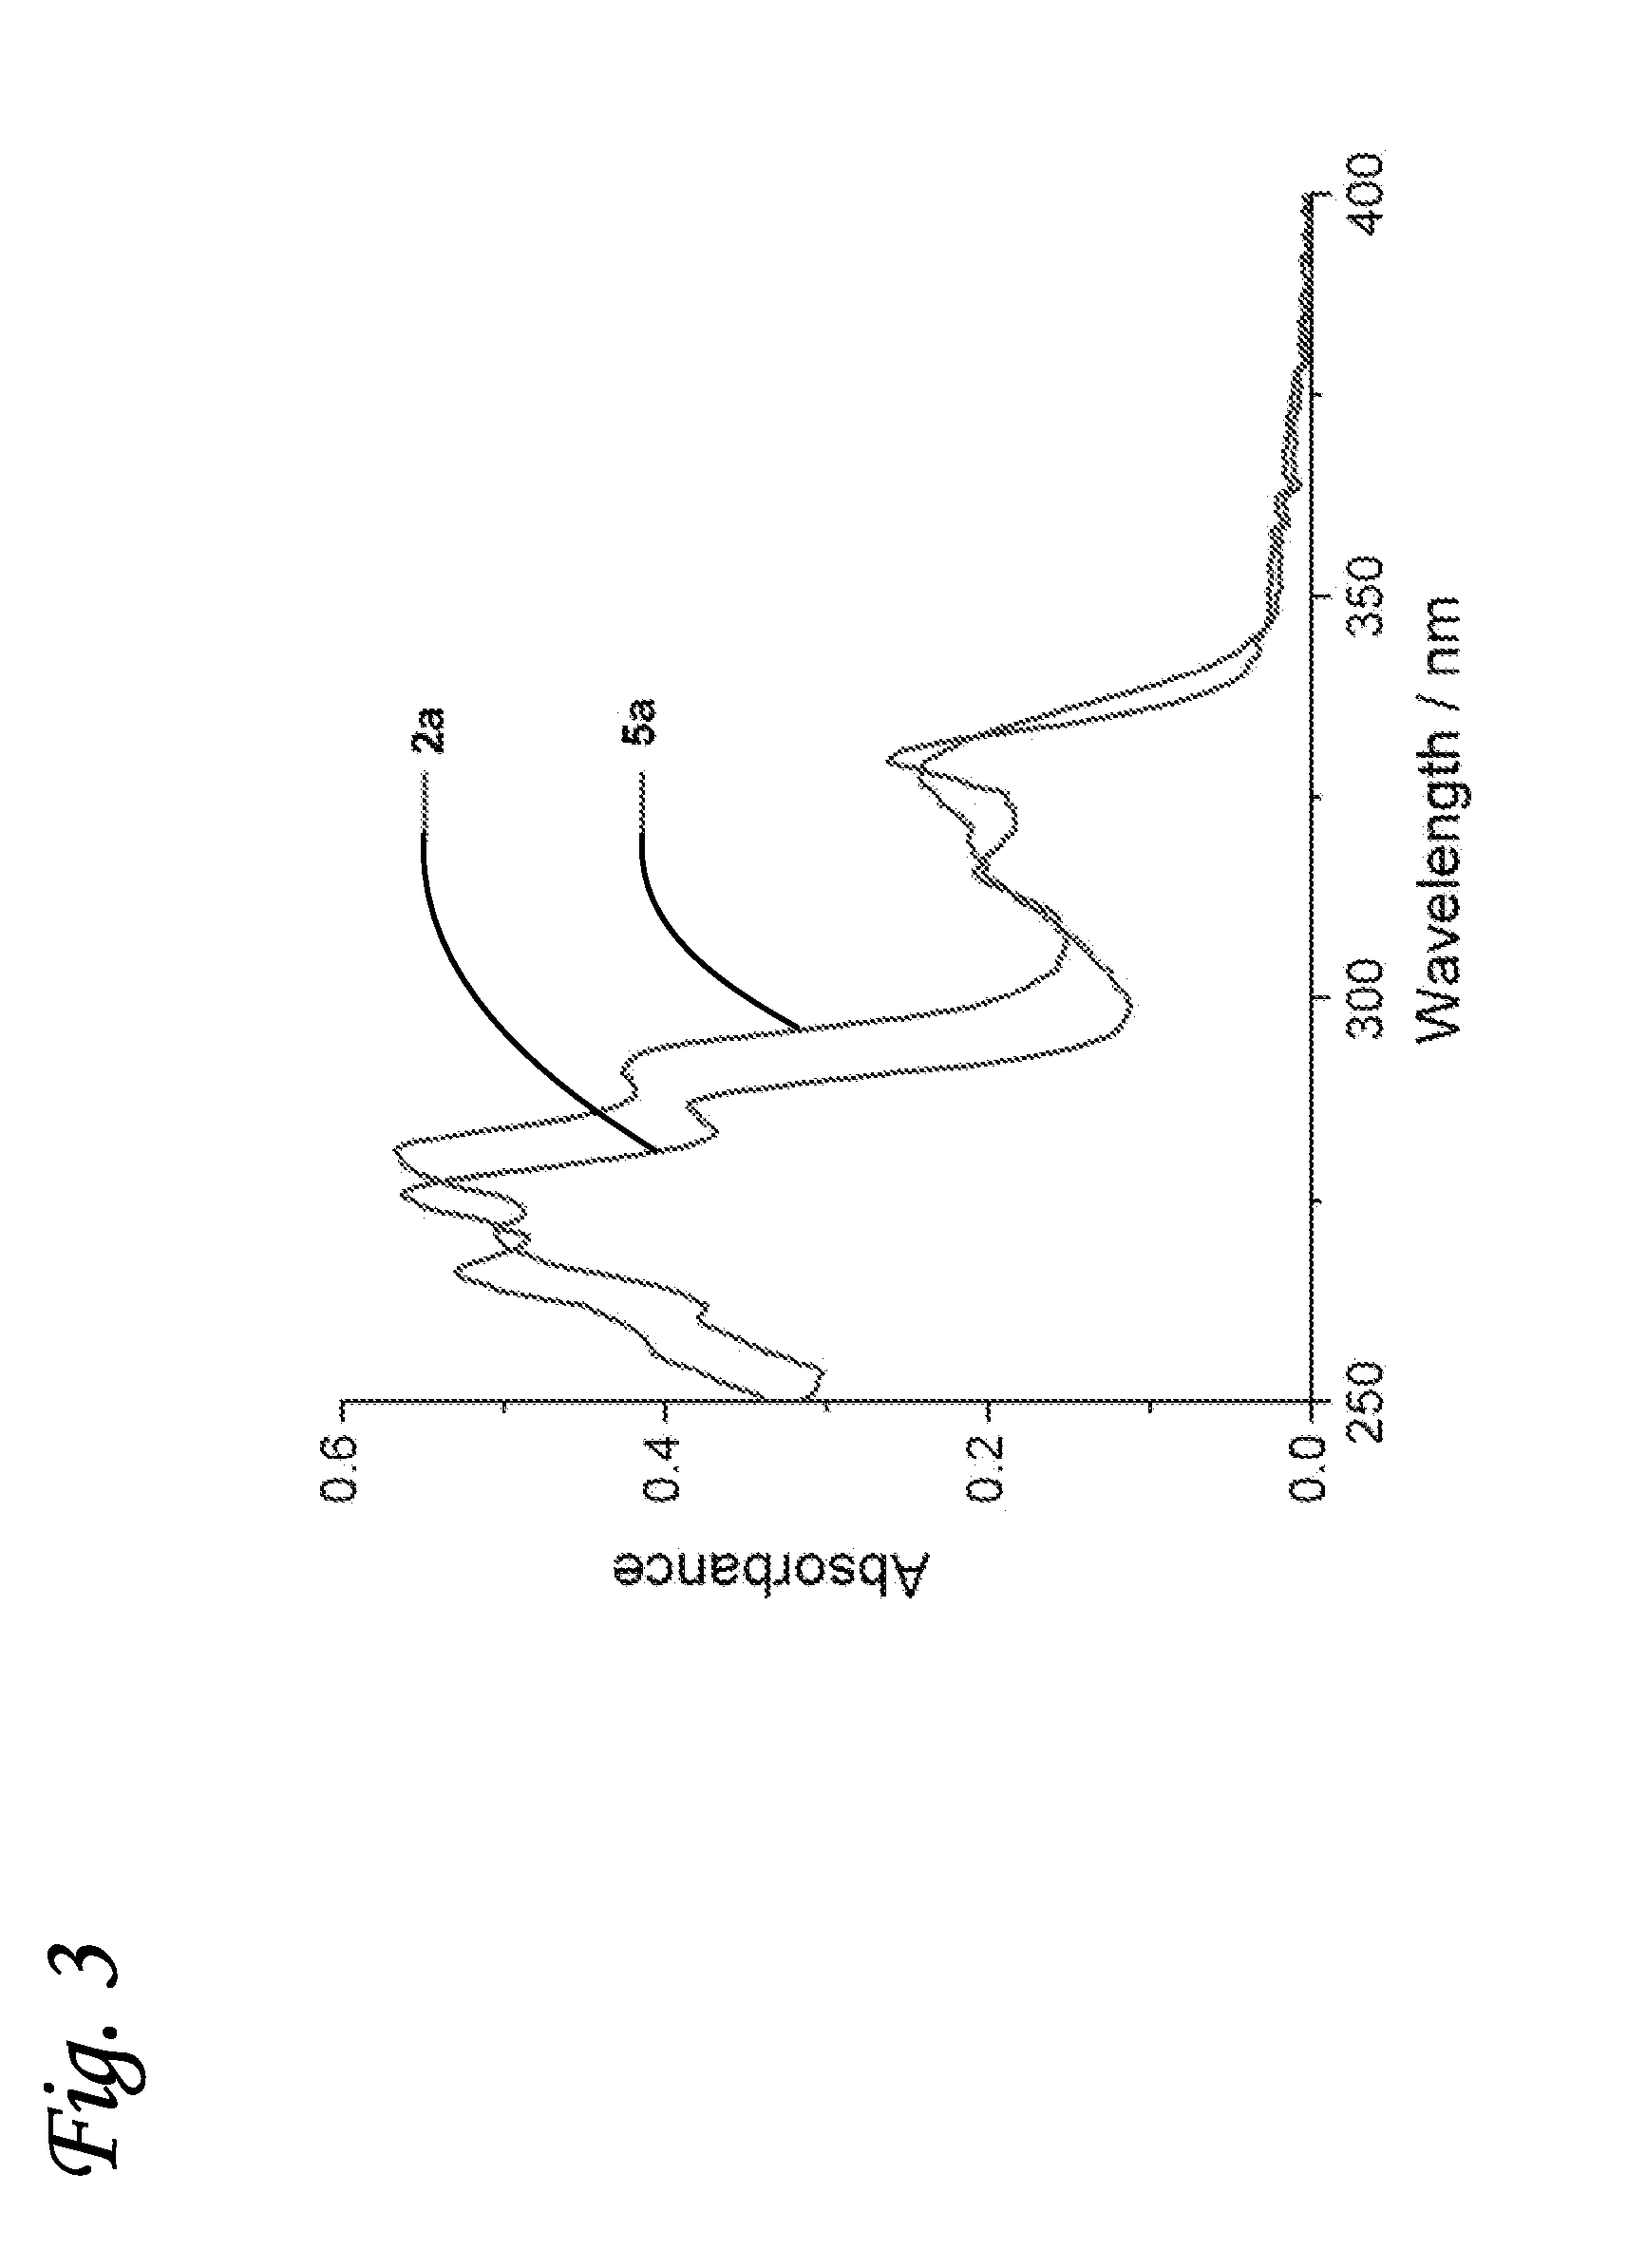 Methods for labeling a substrate using a hetero-diels-alder reaction